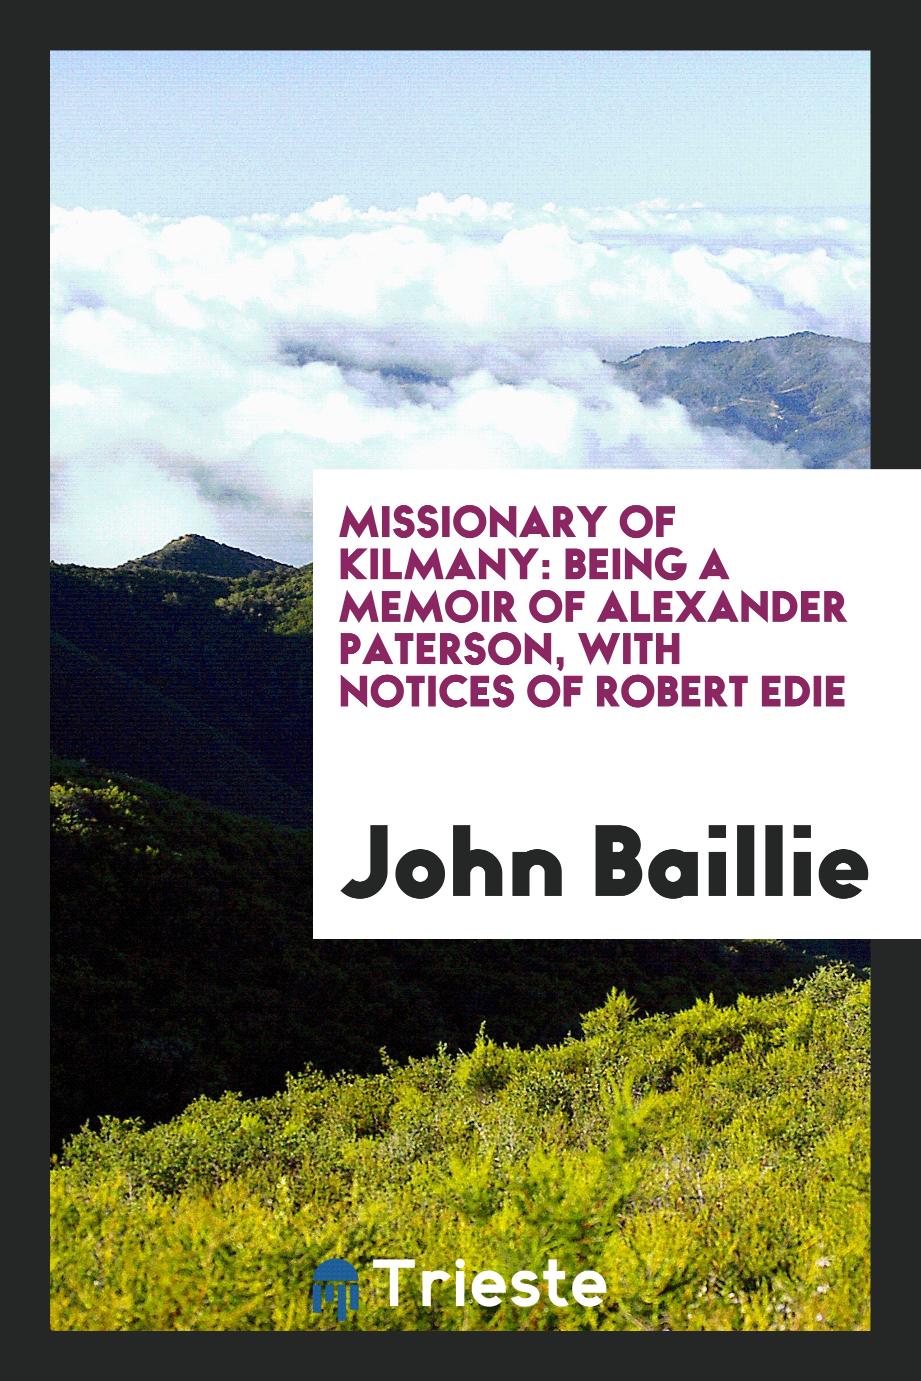 John Baillie - Missionary of Kilmany: being a memoir of Alexander Paterson, with notices of Robert Edie